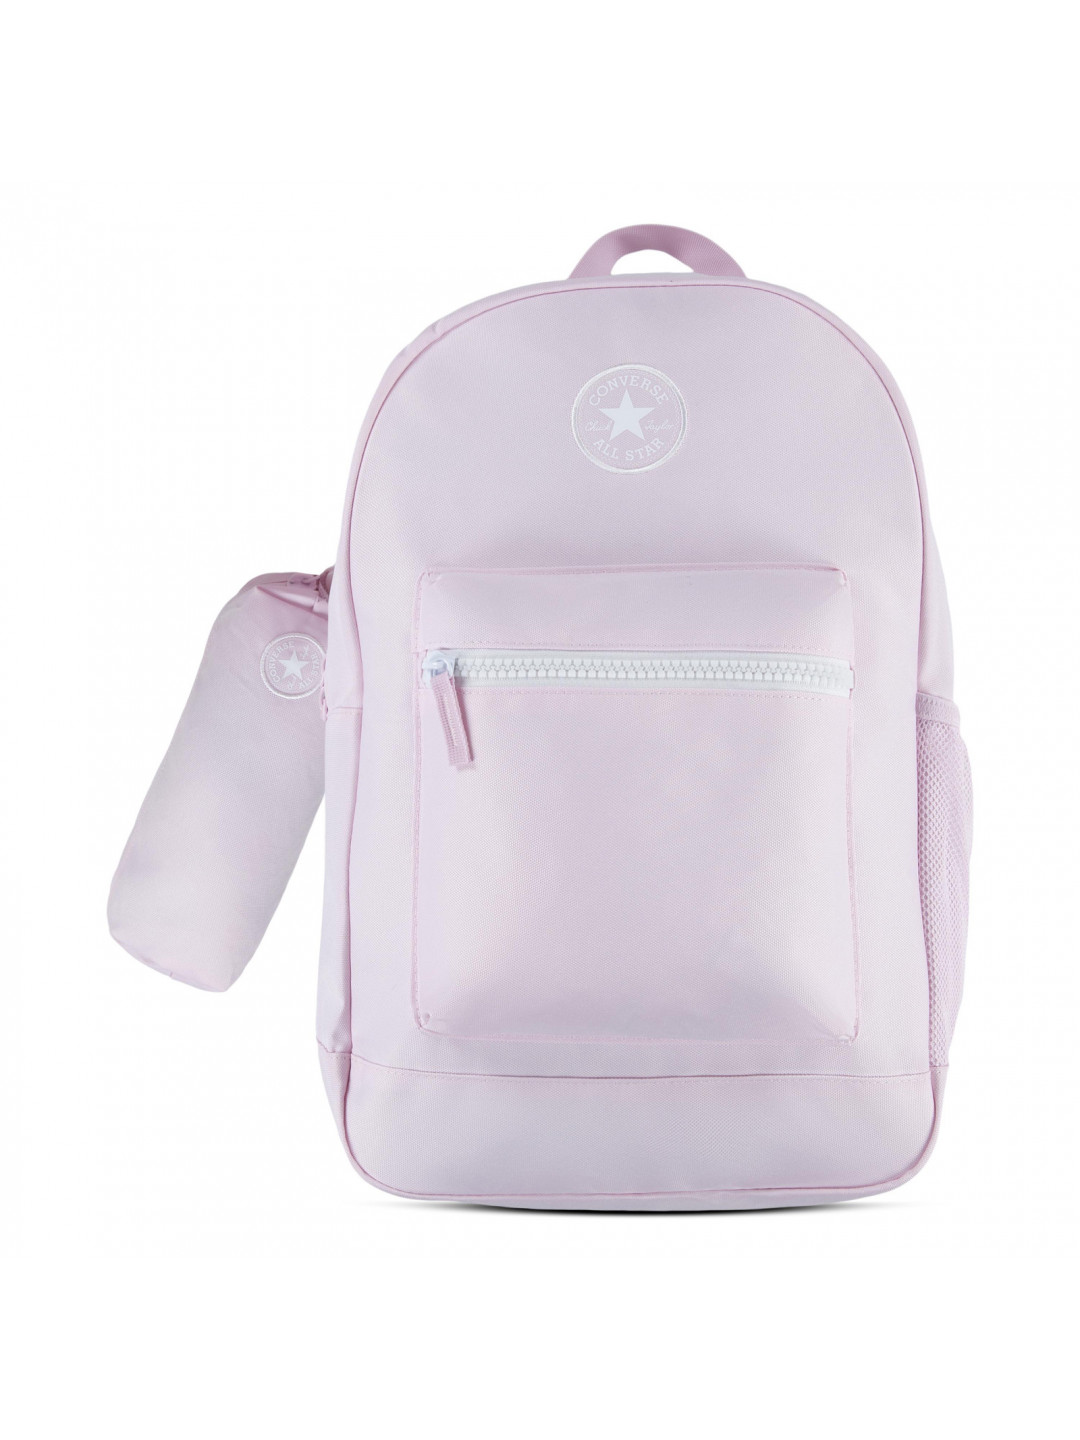 Converse backpack & pencil case o s